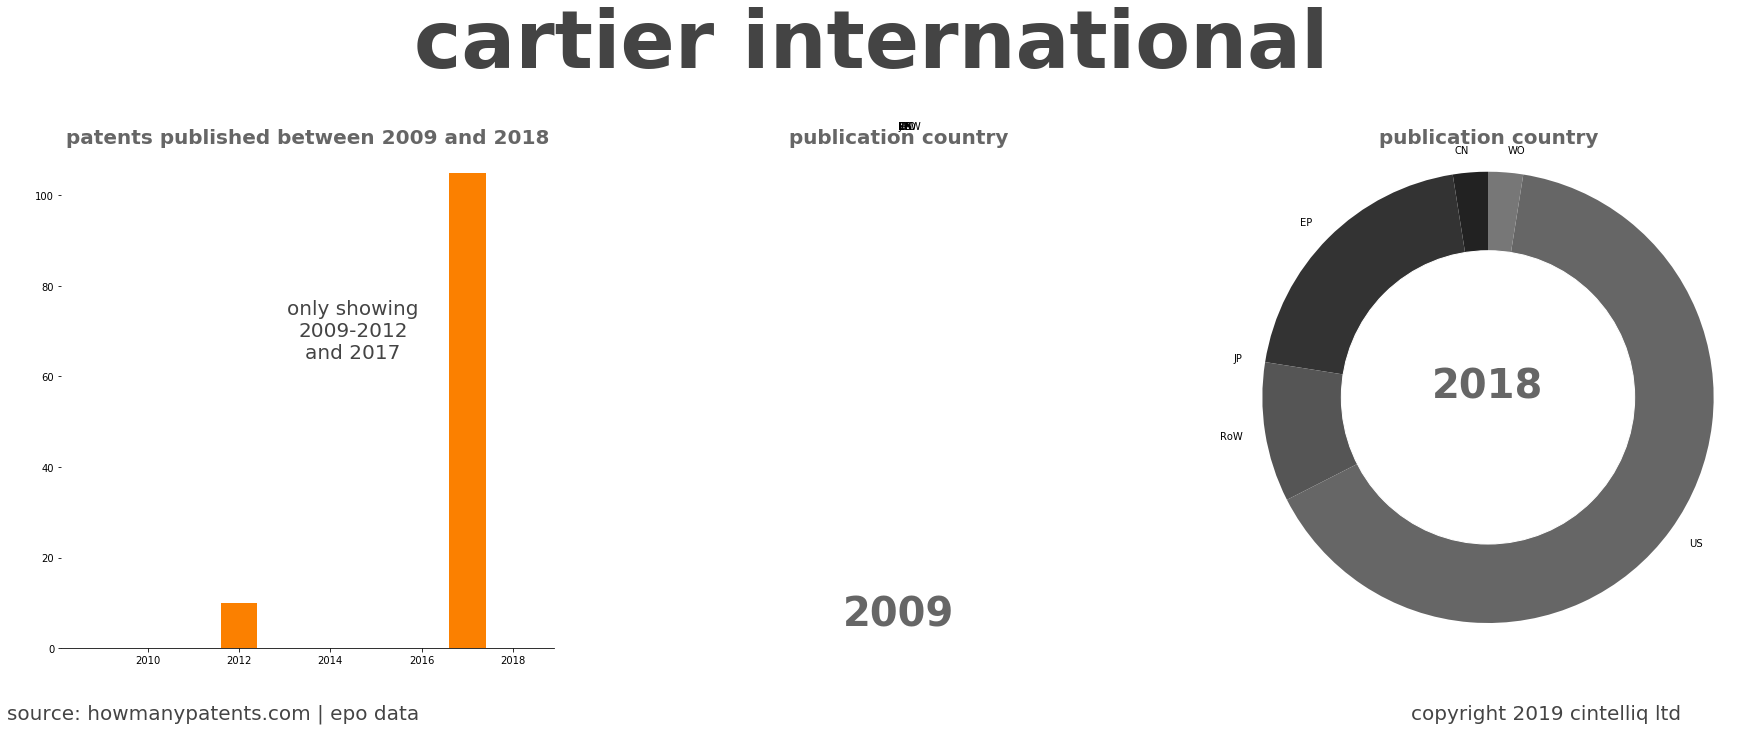 summary of patents for Cartier International